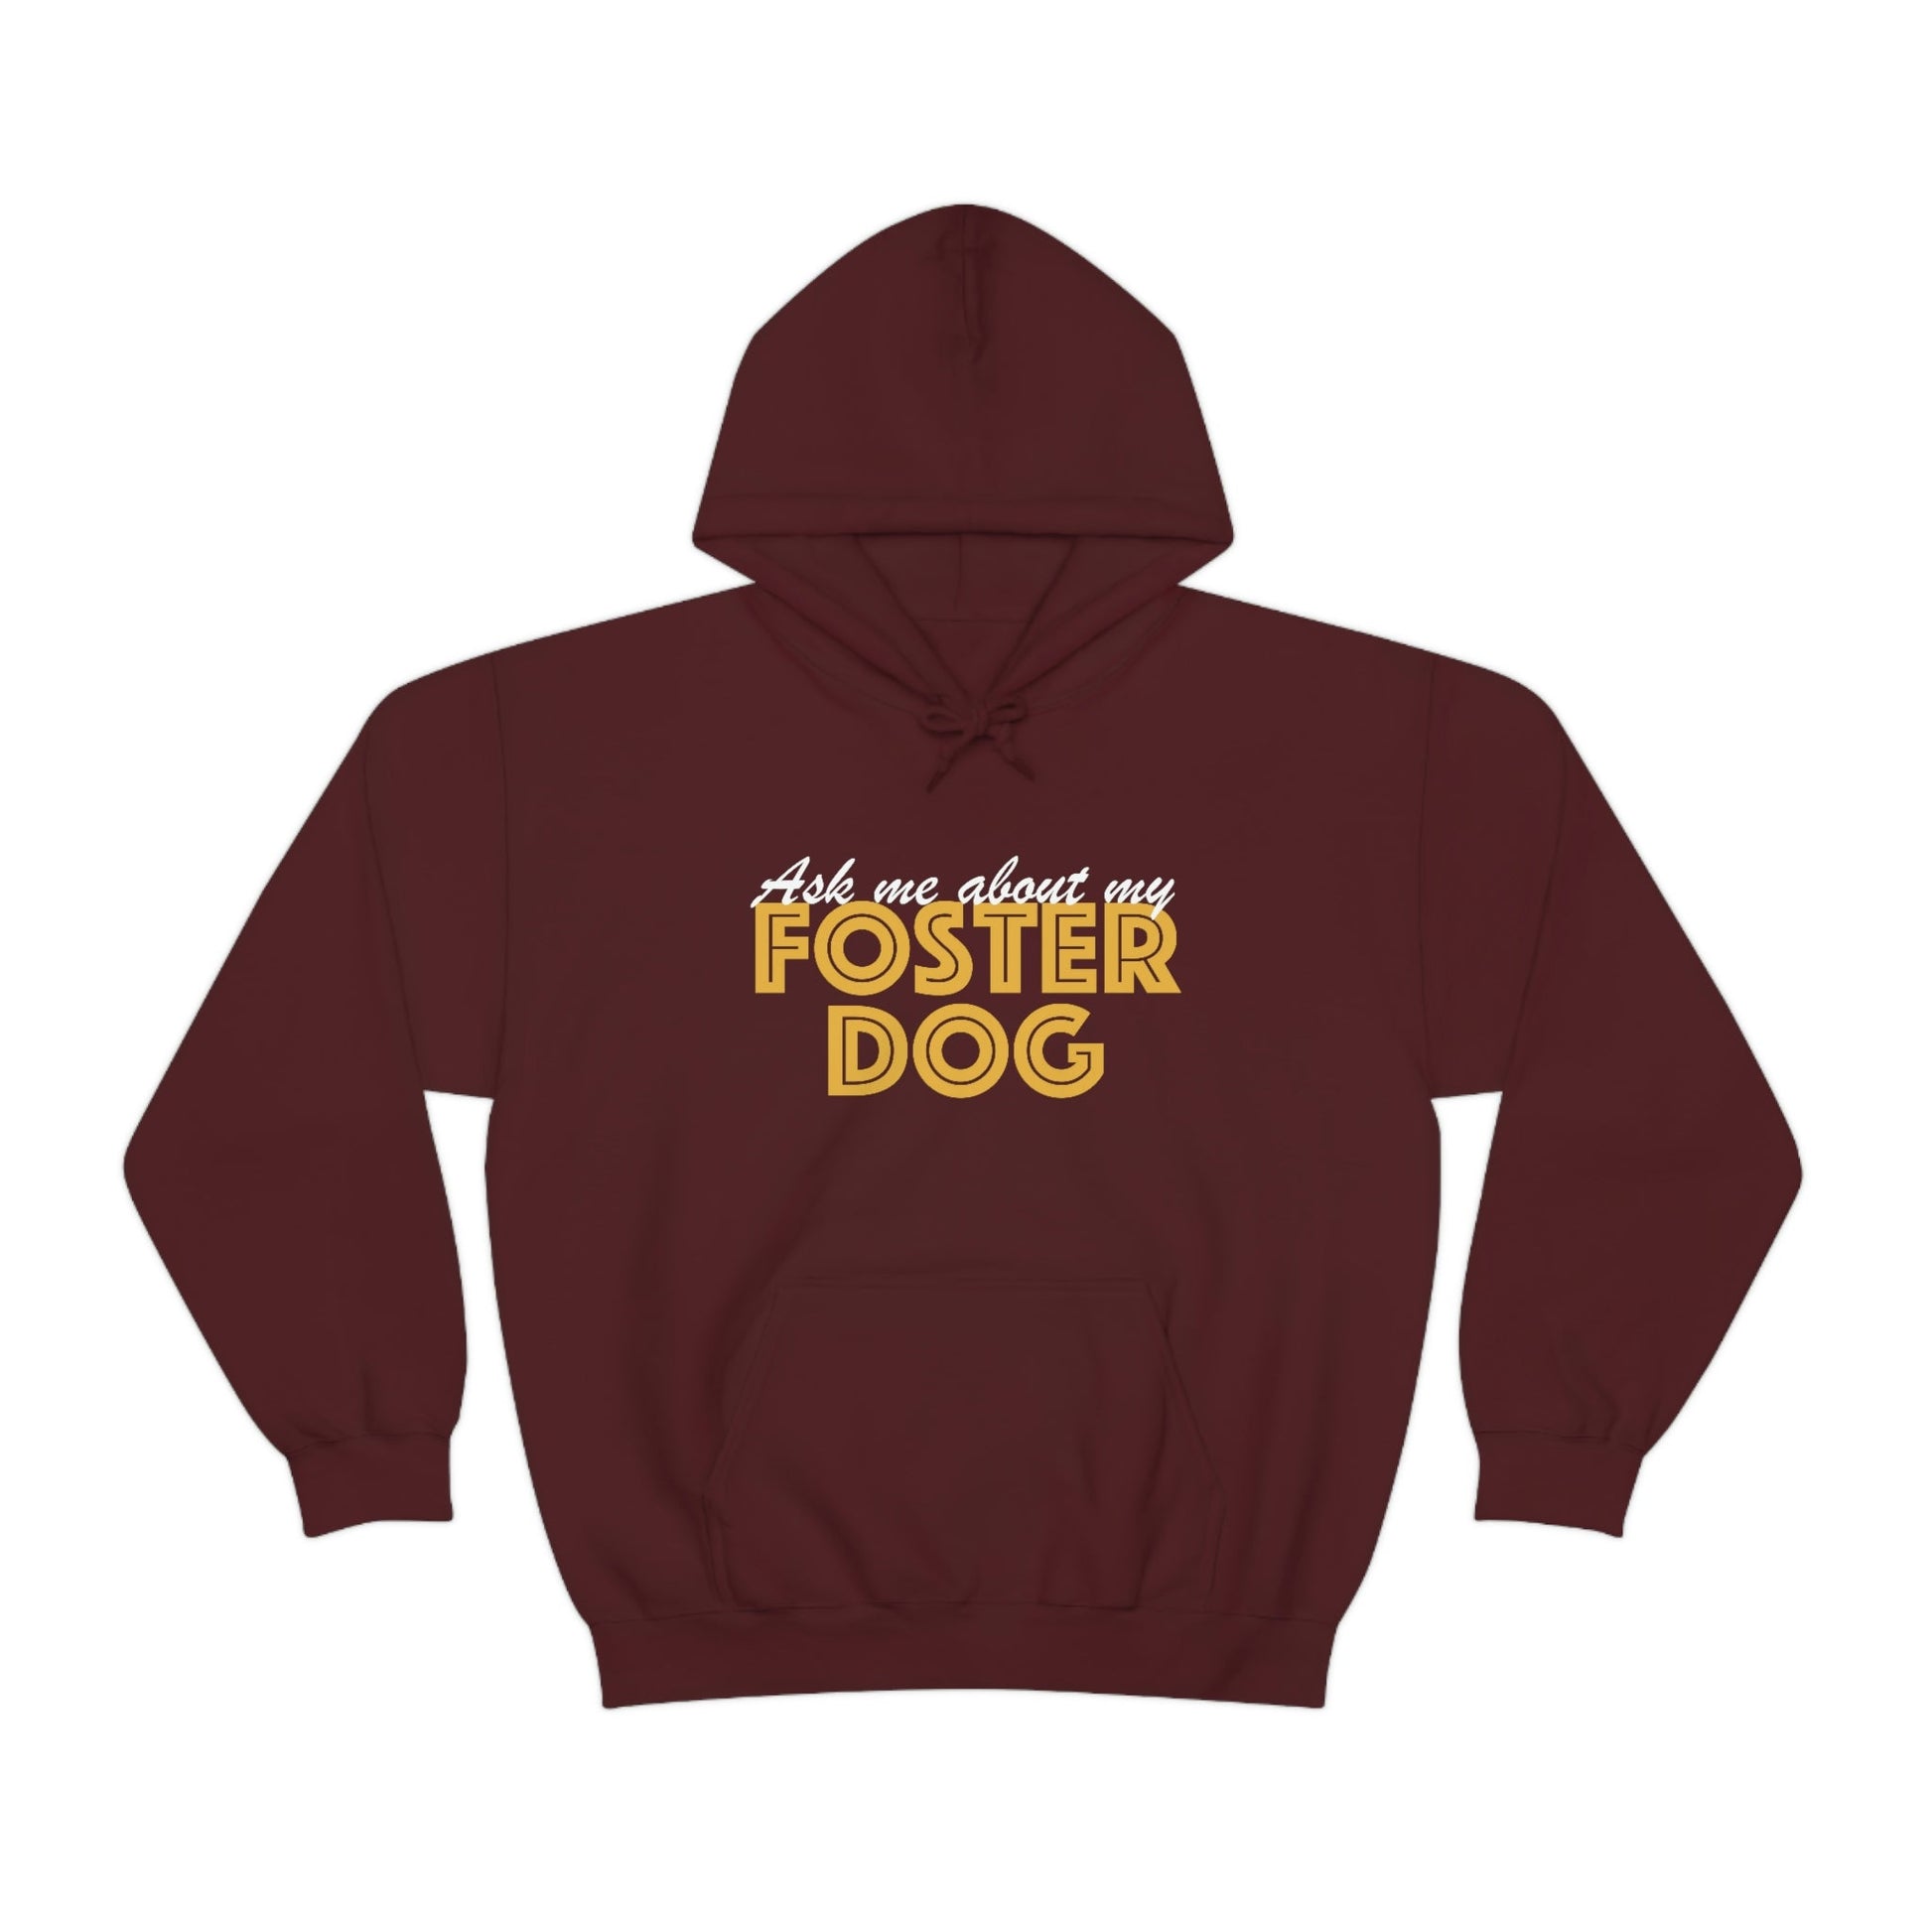 Ask Me About My Foster Dog | Hooded Sweatshirt - Detezi Designs-16521314853936616054